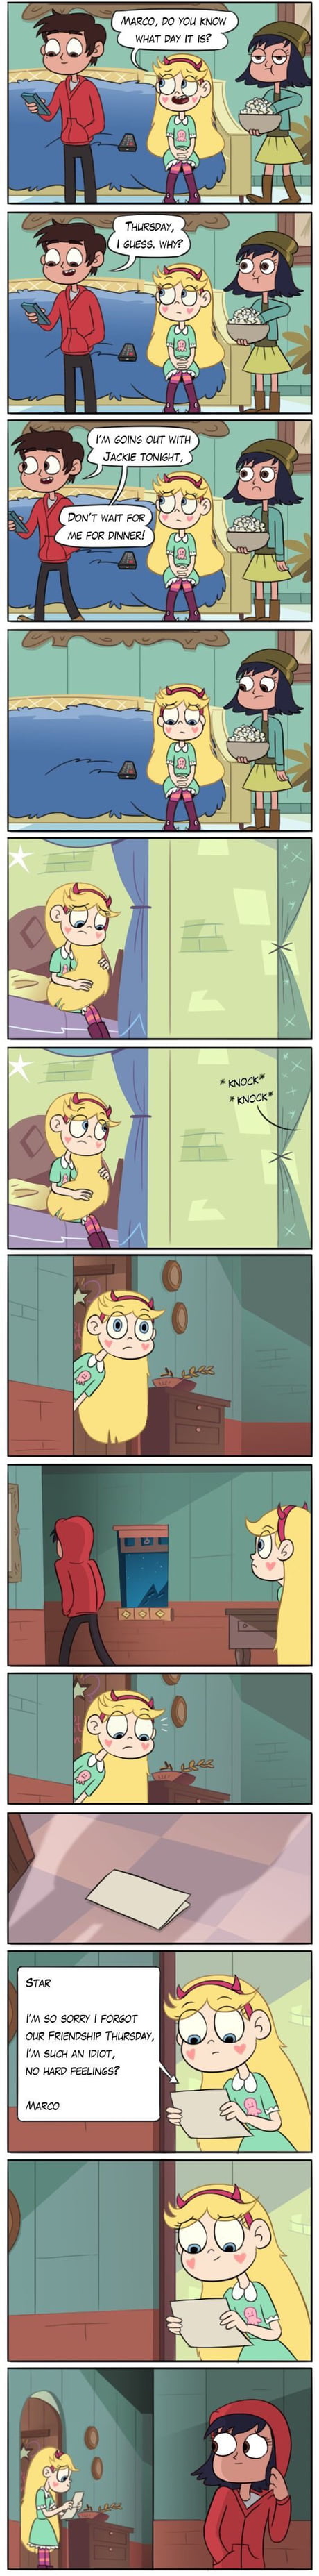 Star vs the forces of evil comic between friends